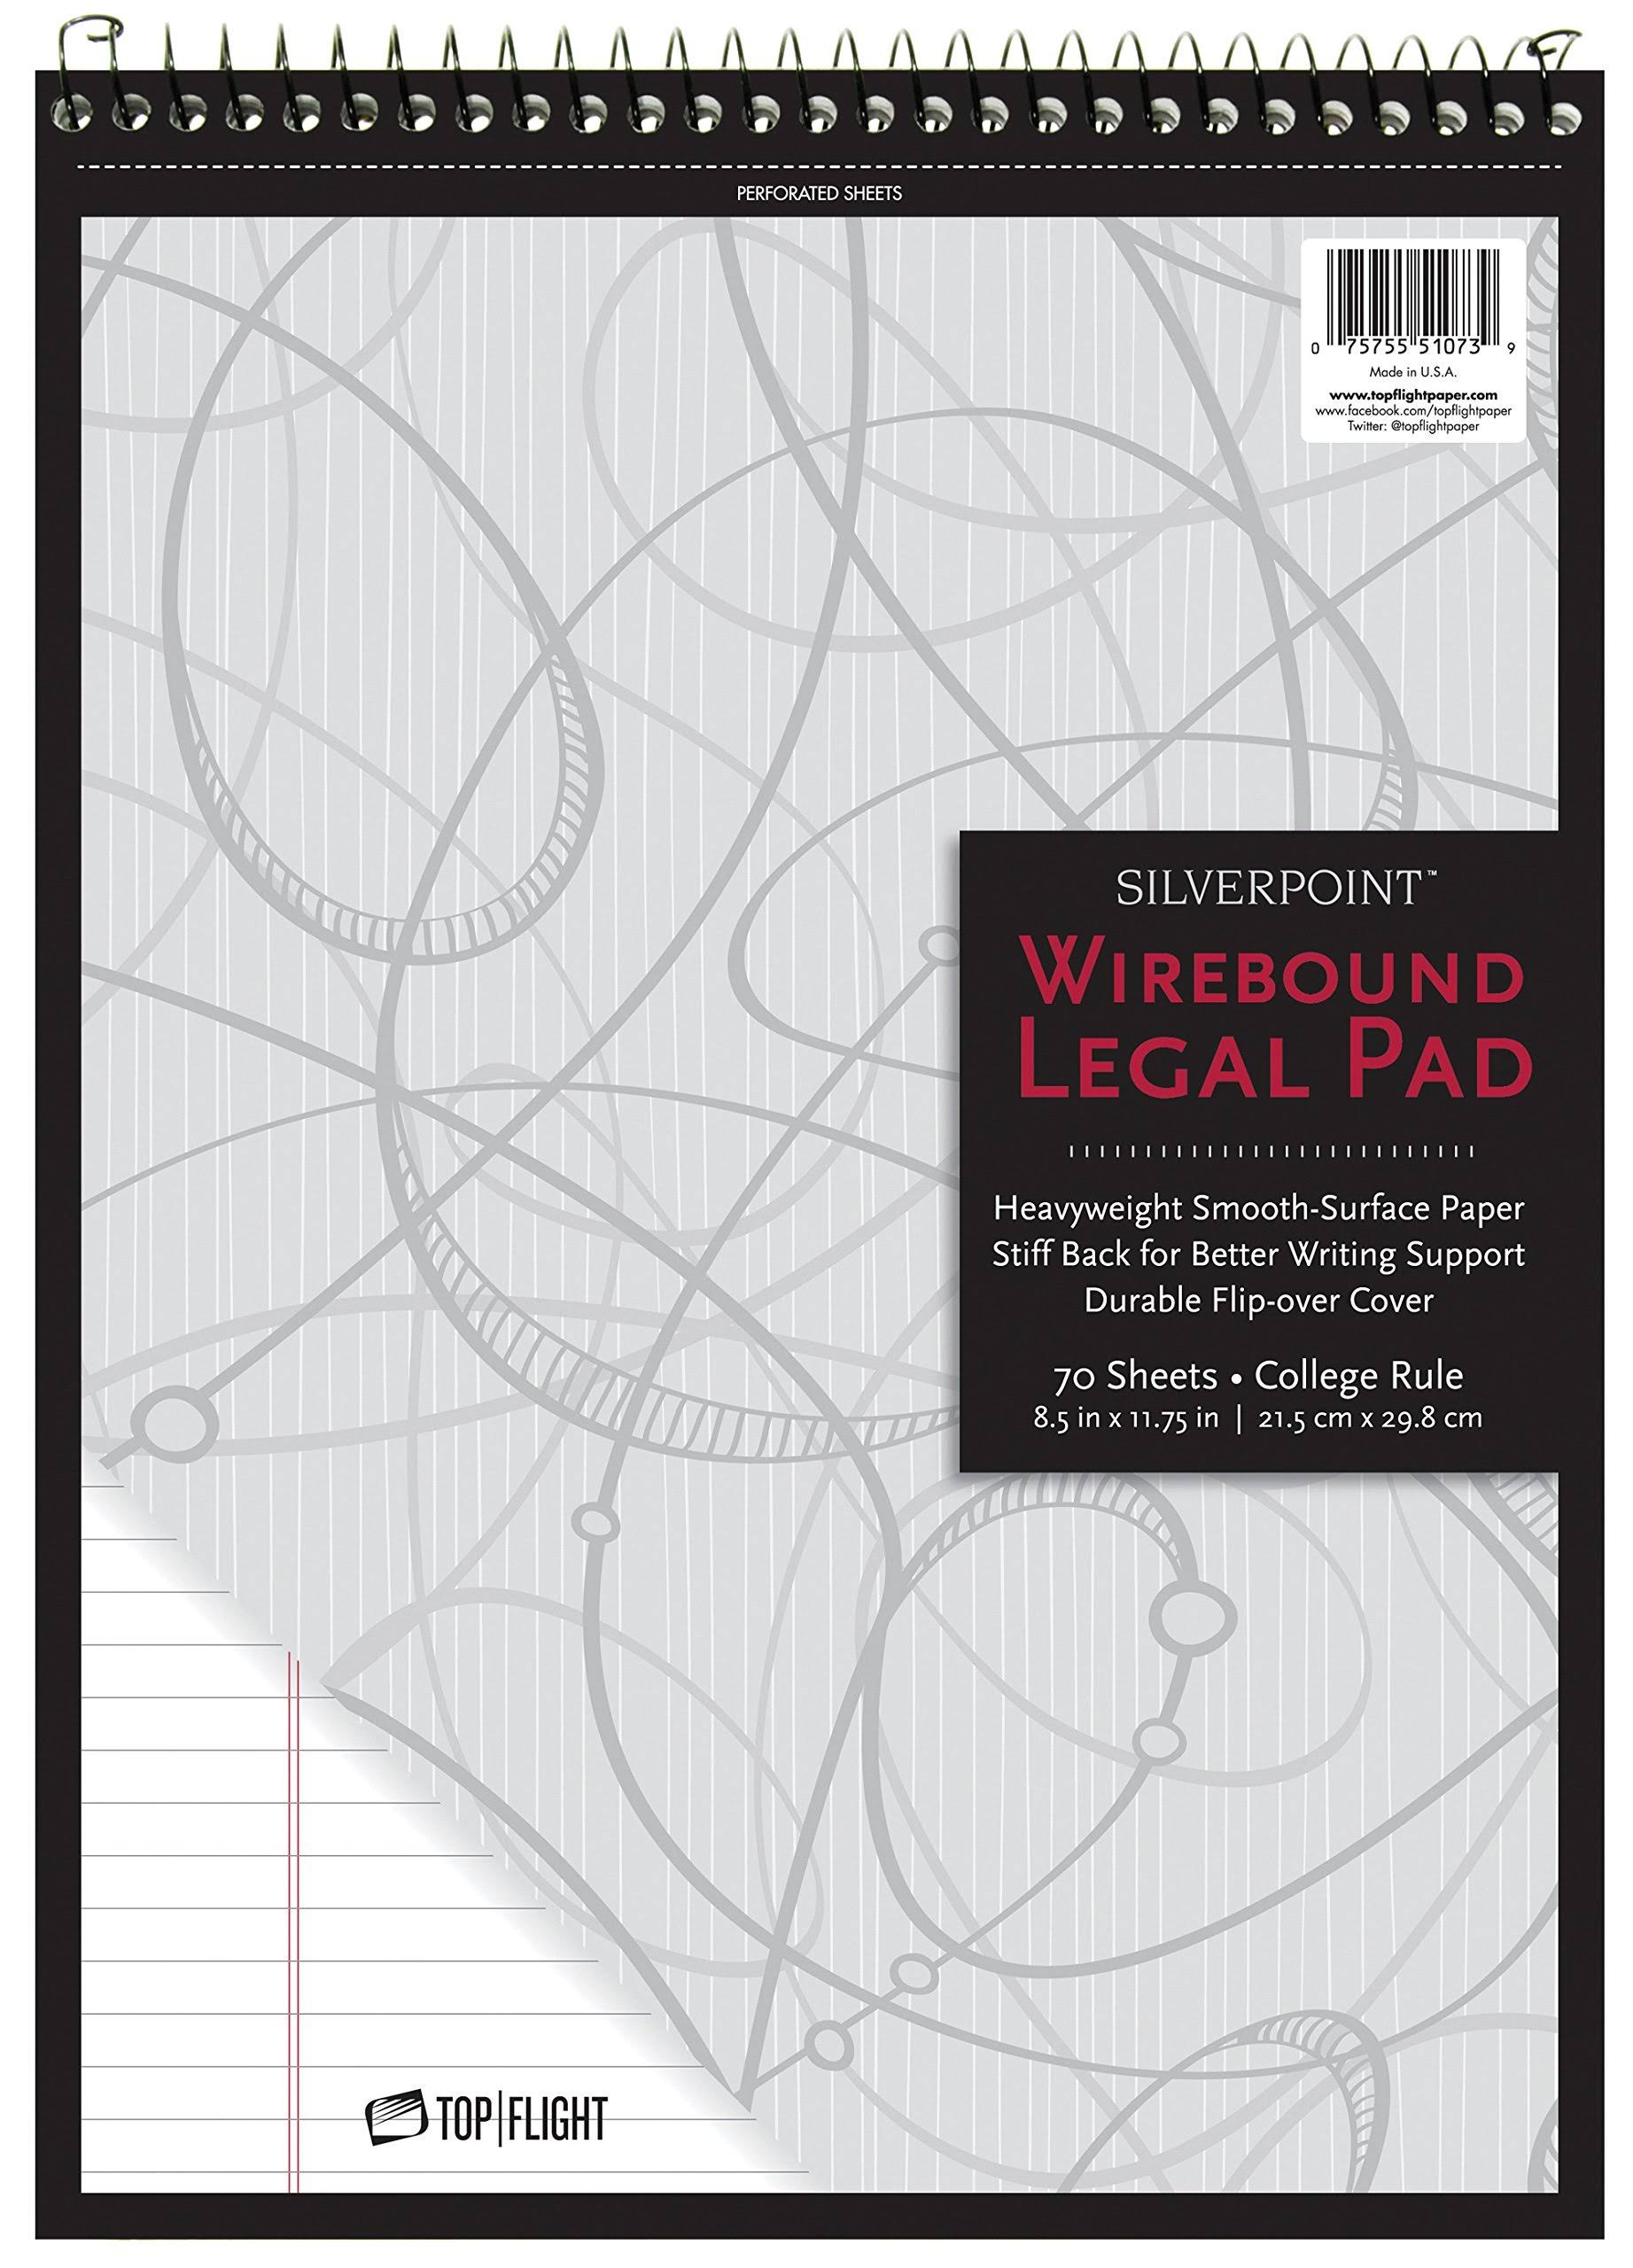 Top Flight Silverpoint Legal Pad, Wirebound, College Rule, 70 Sheets